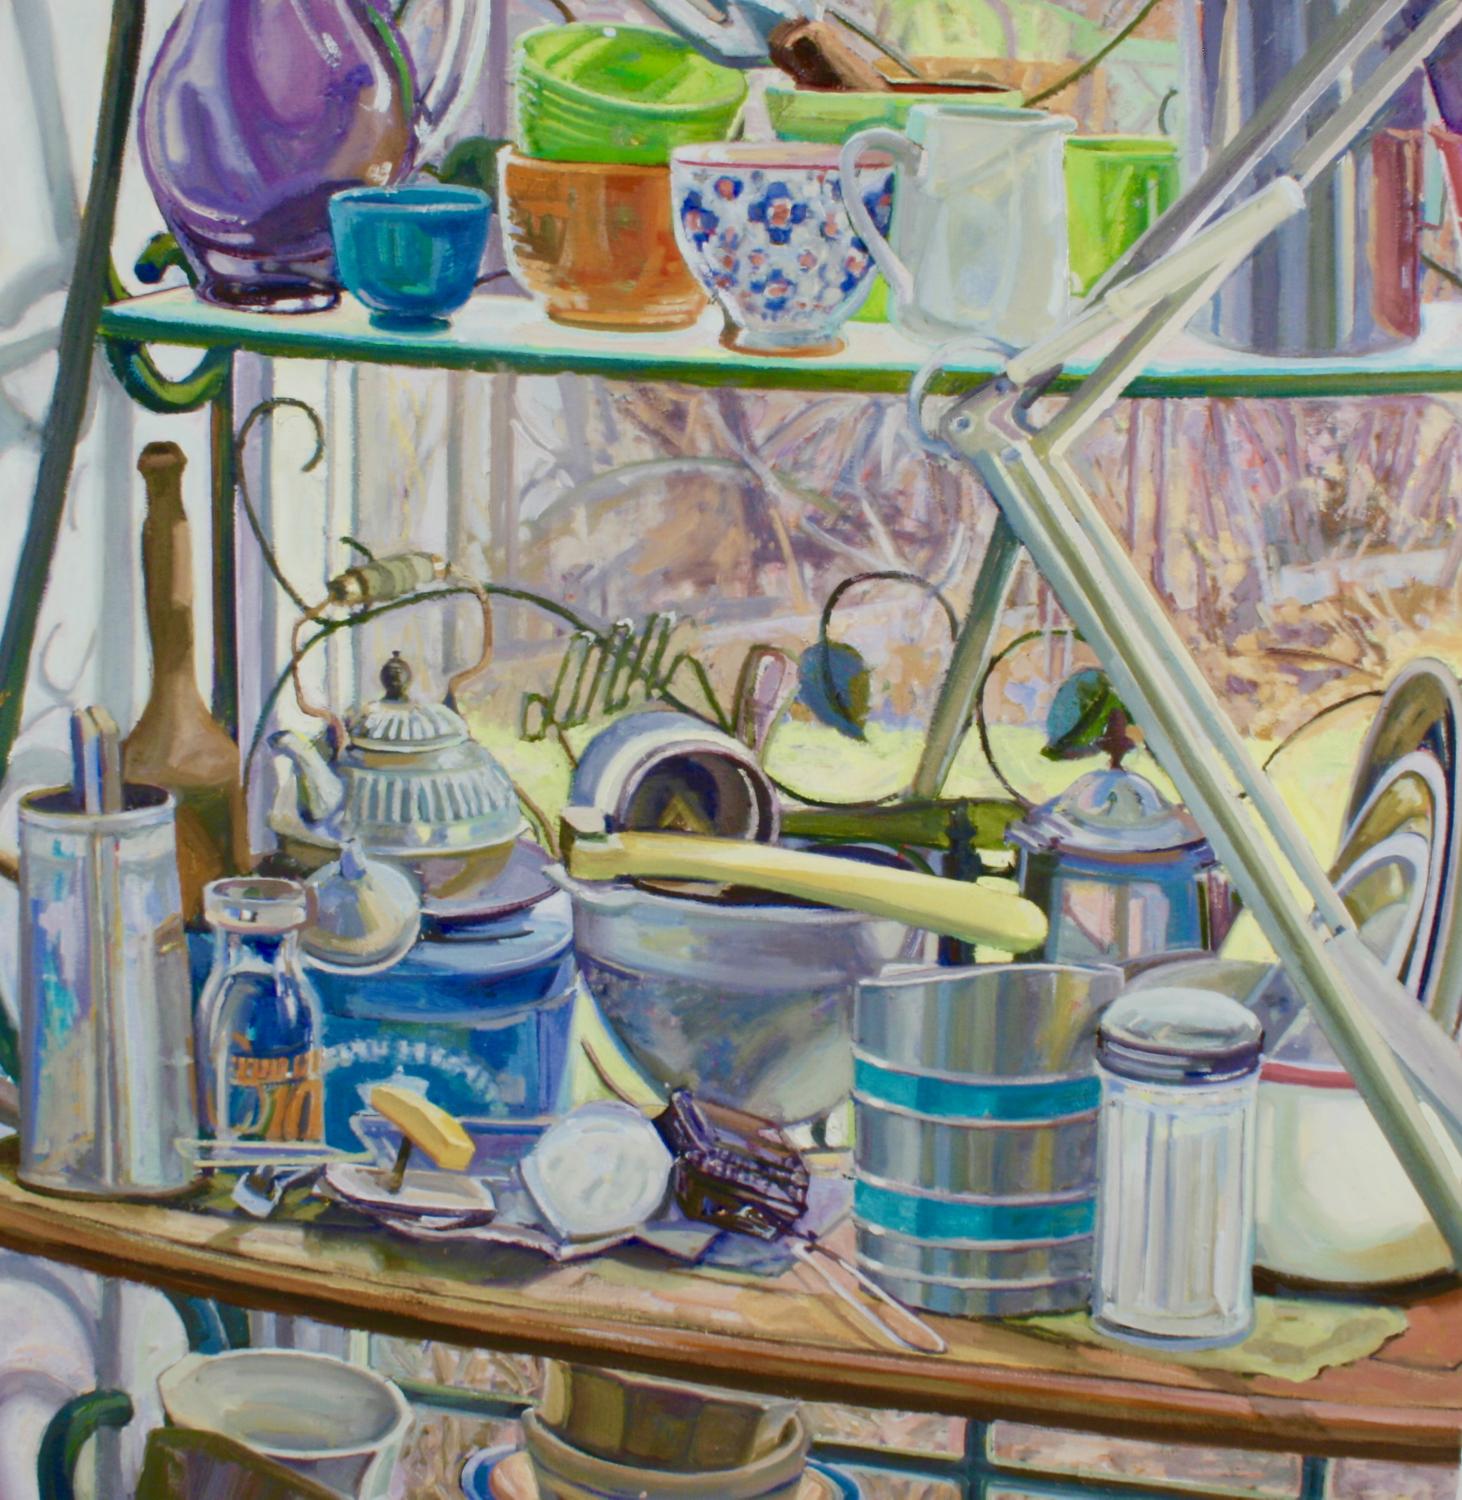 "Illuminated Kitchenware", still life, retro, high chroma, oil painting - Painting by Jill Pottle